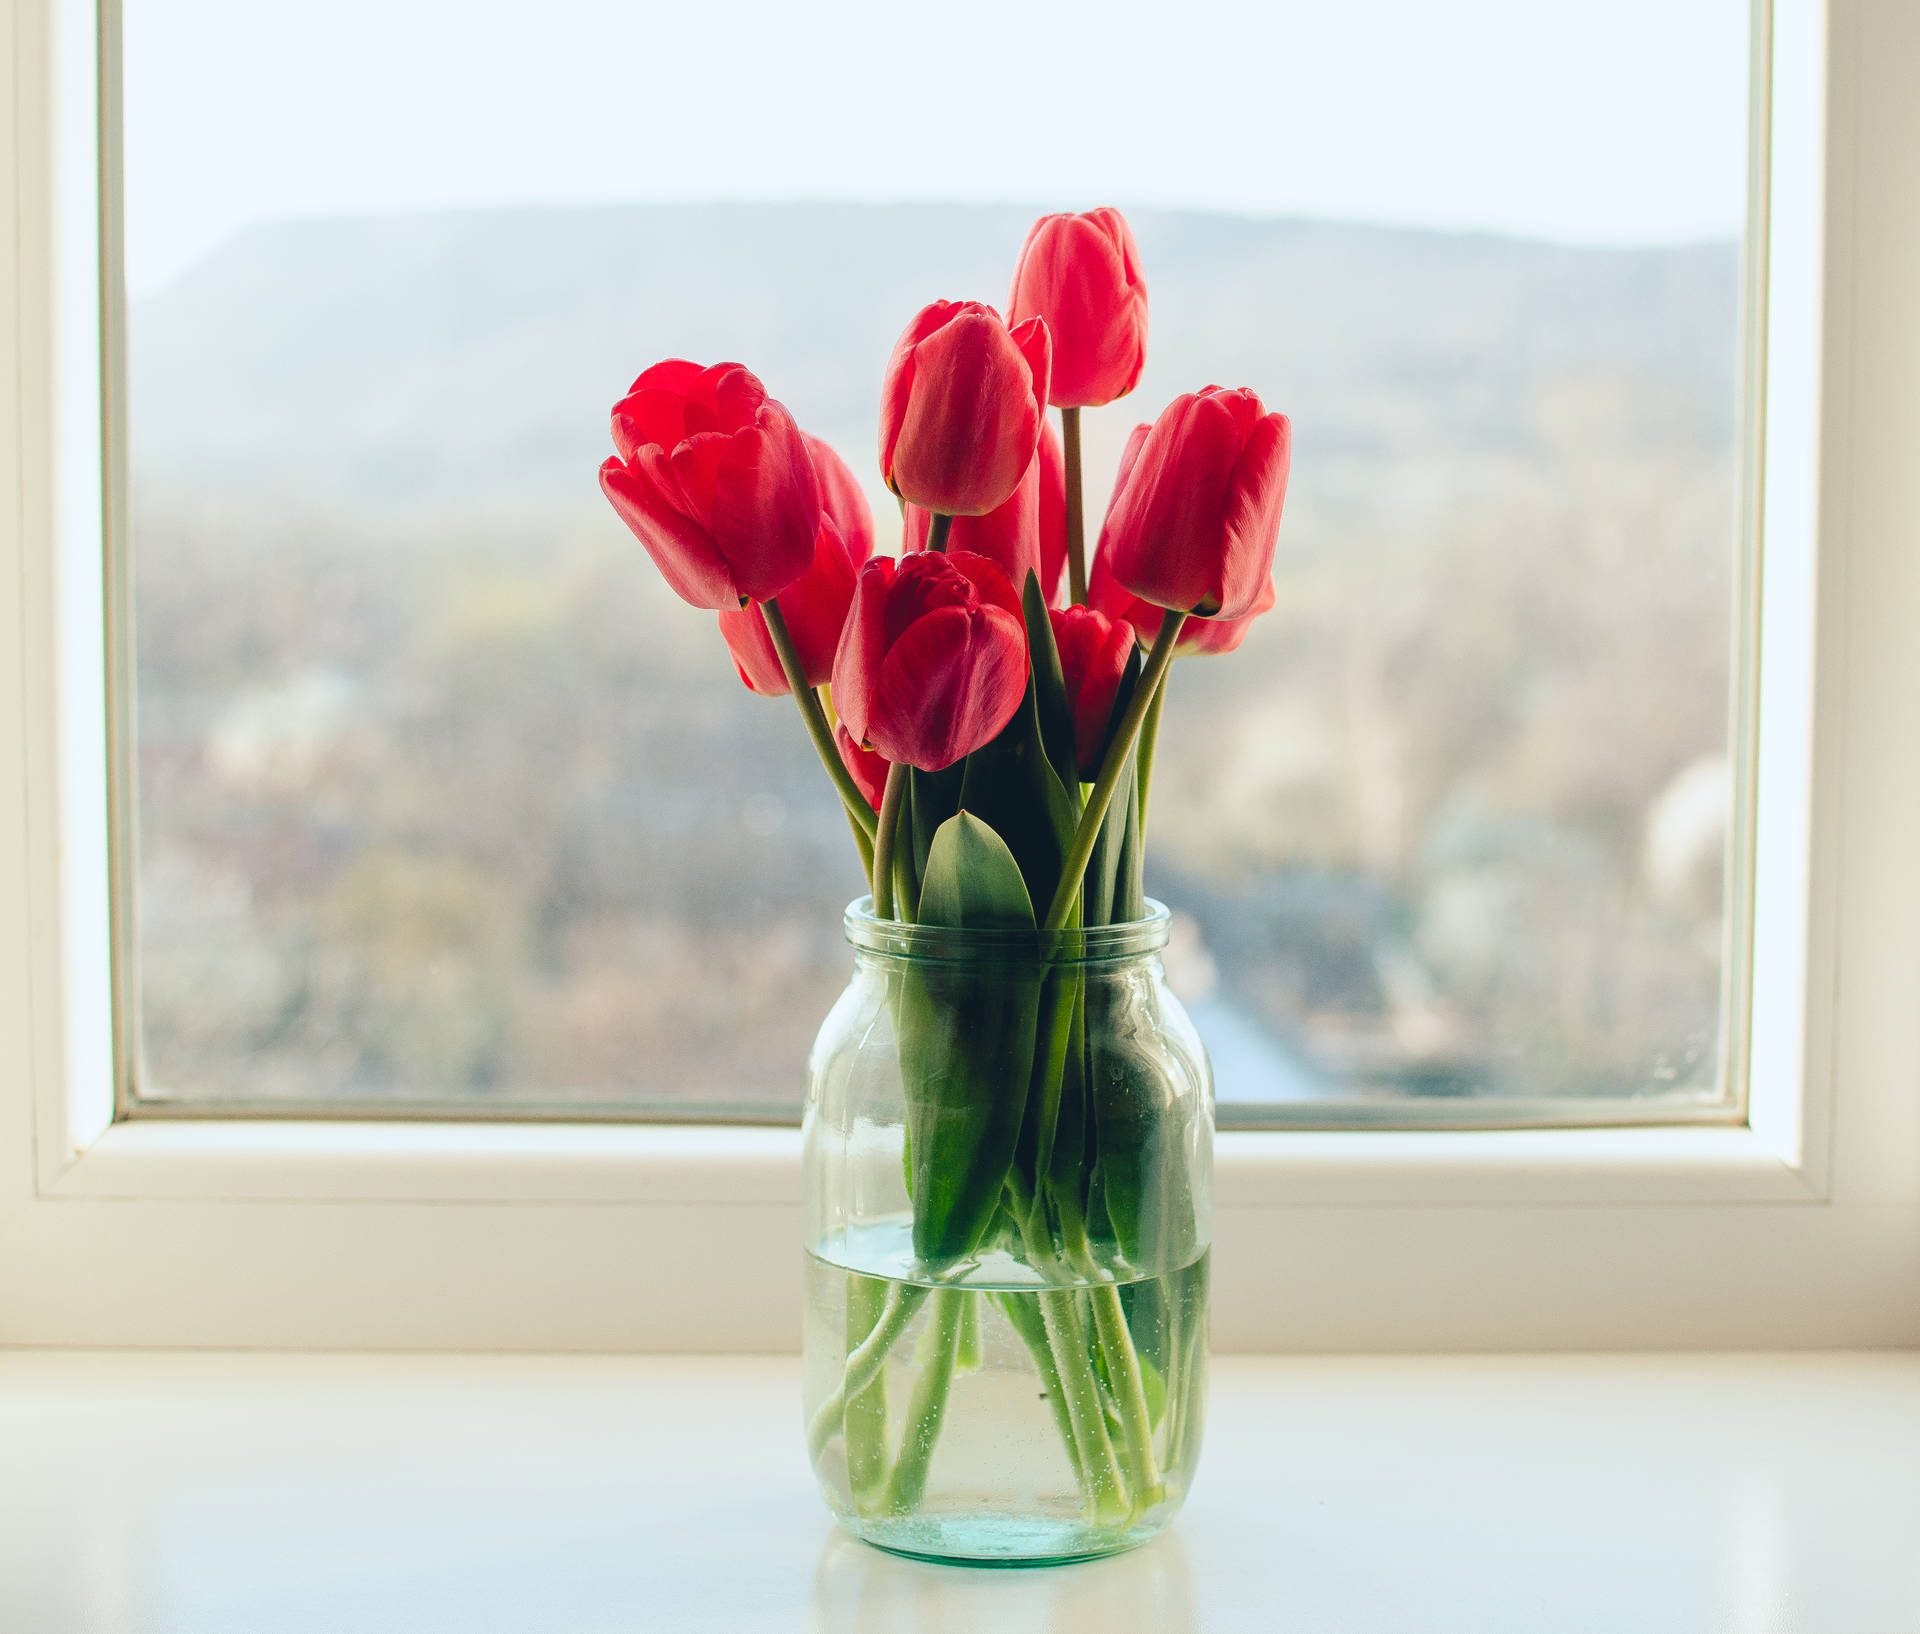 1920x1634 Download Red Tulips By The Window Wallpaper